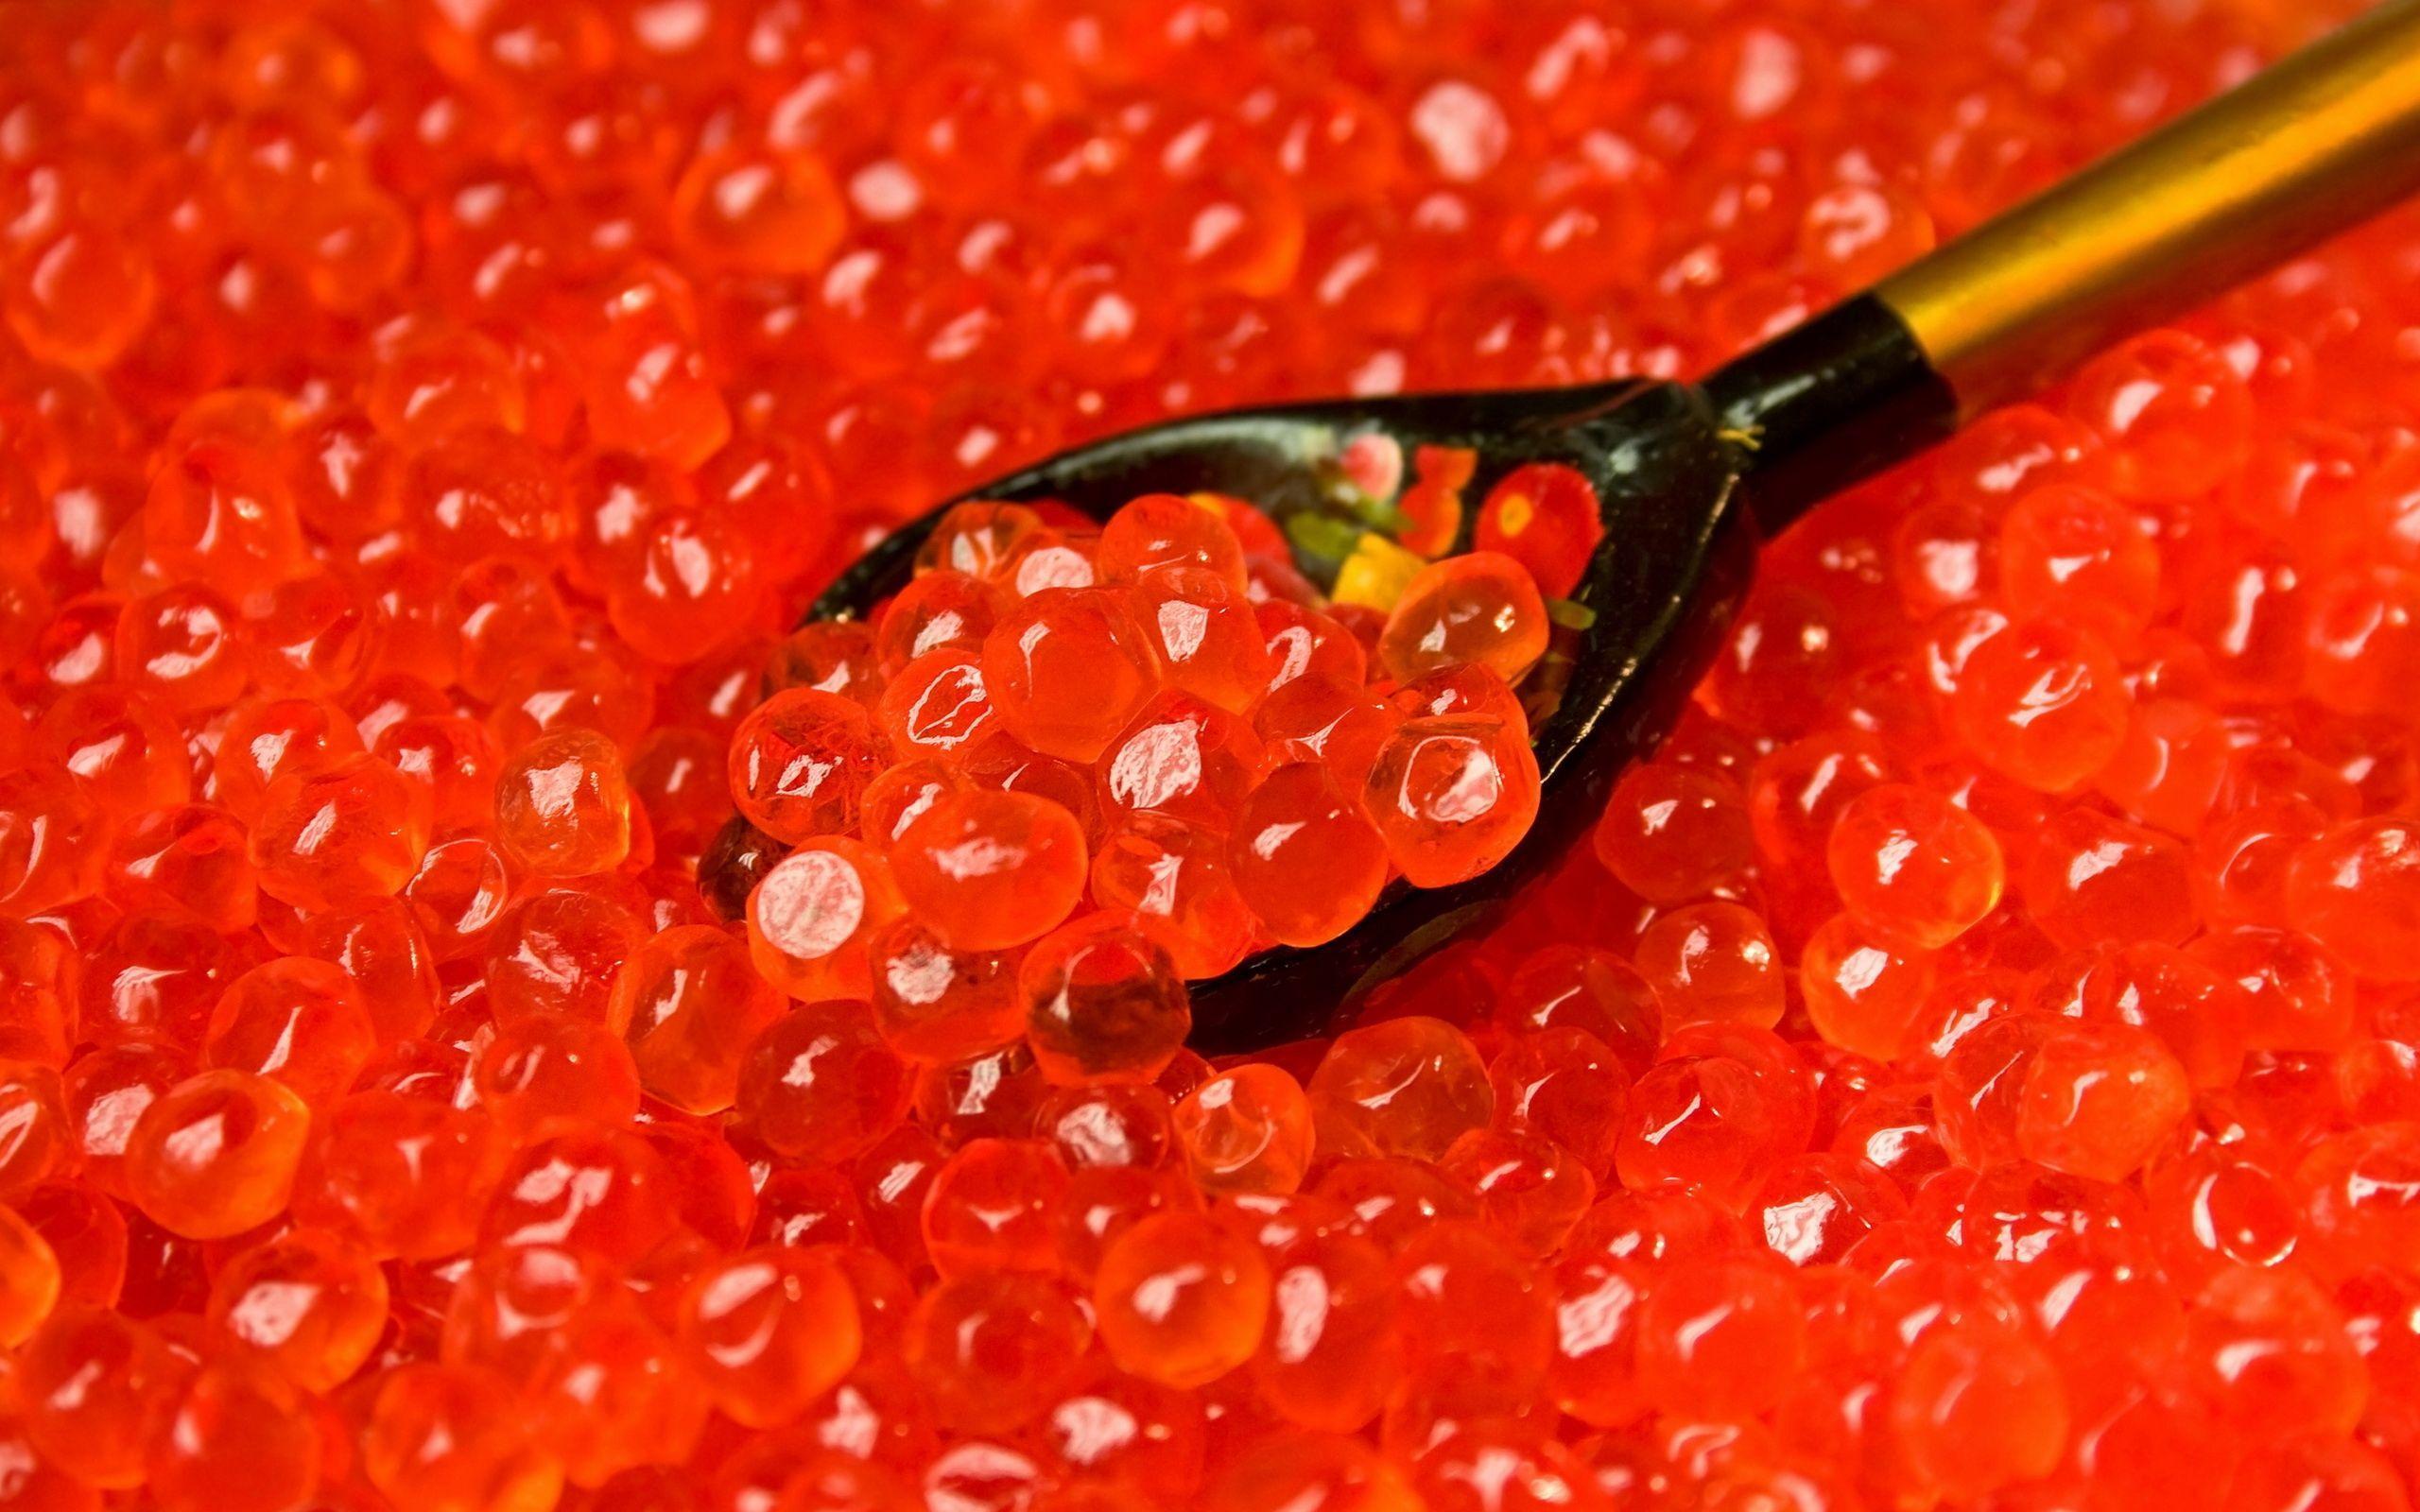 Caviar wallpaper and image, picture, photo